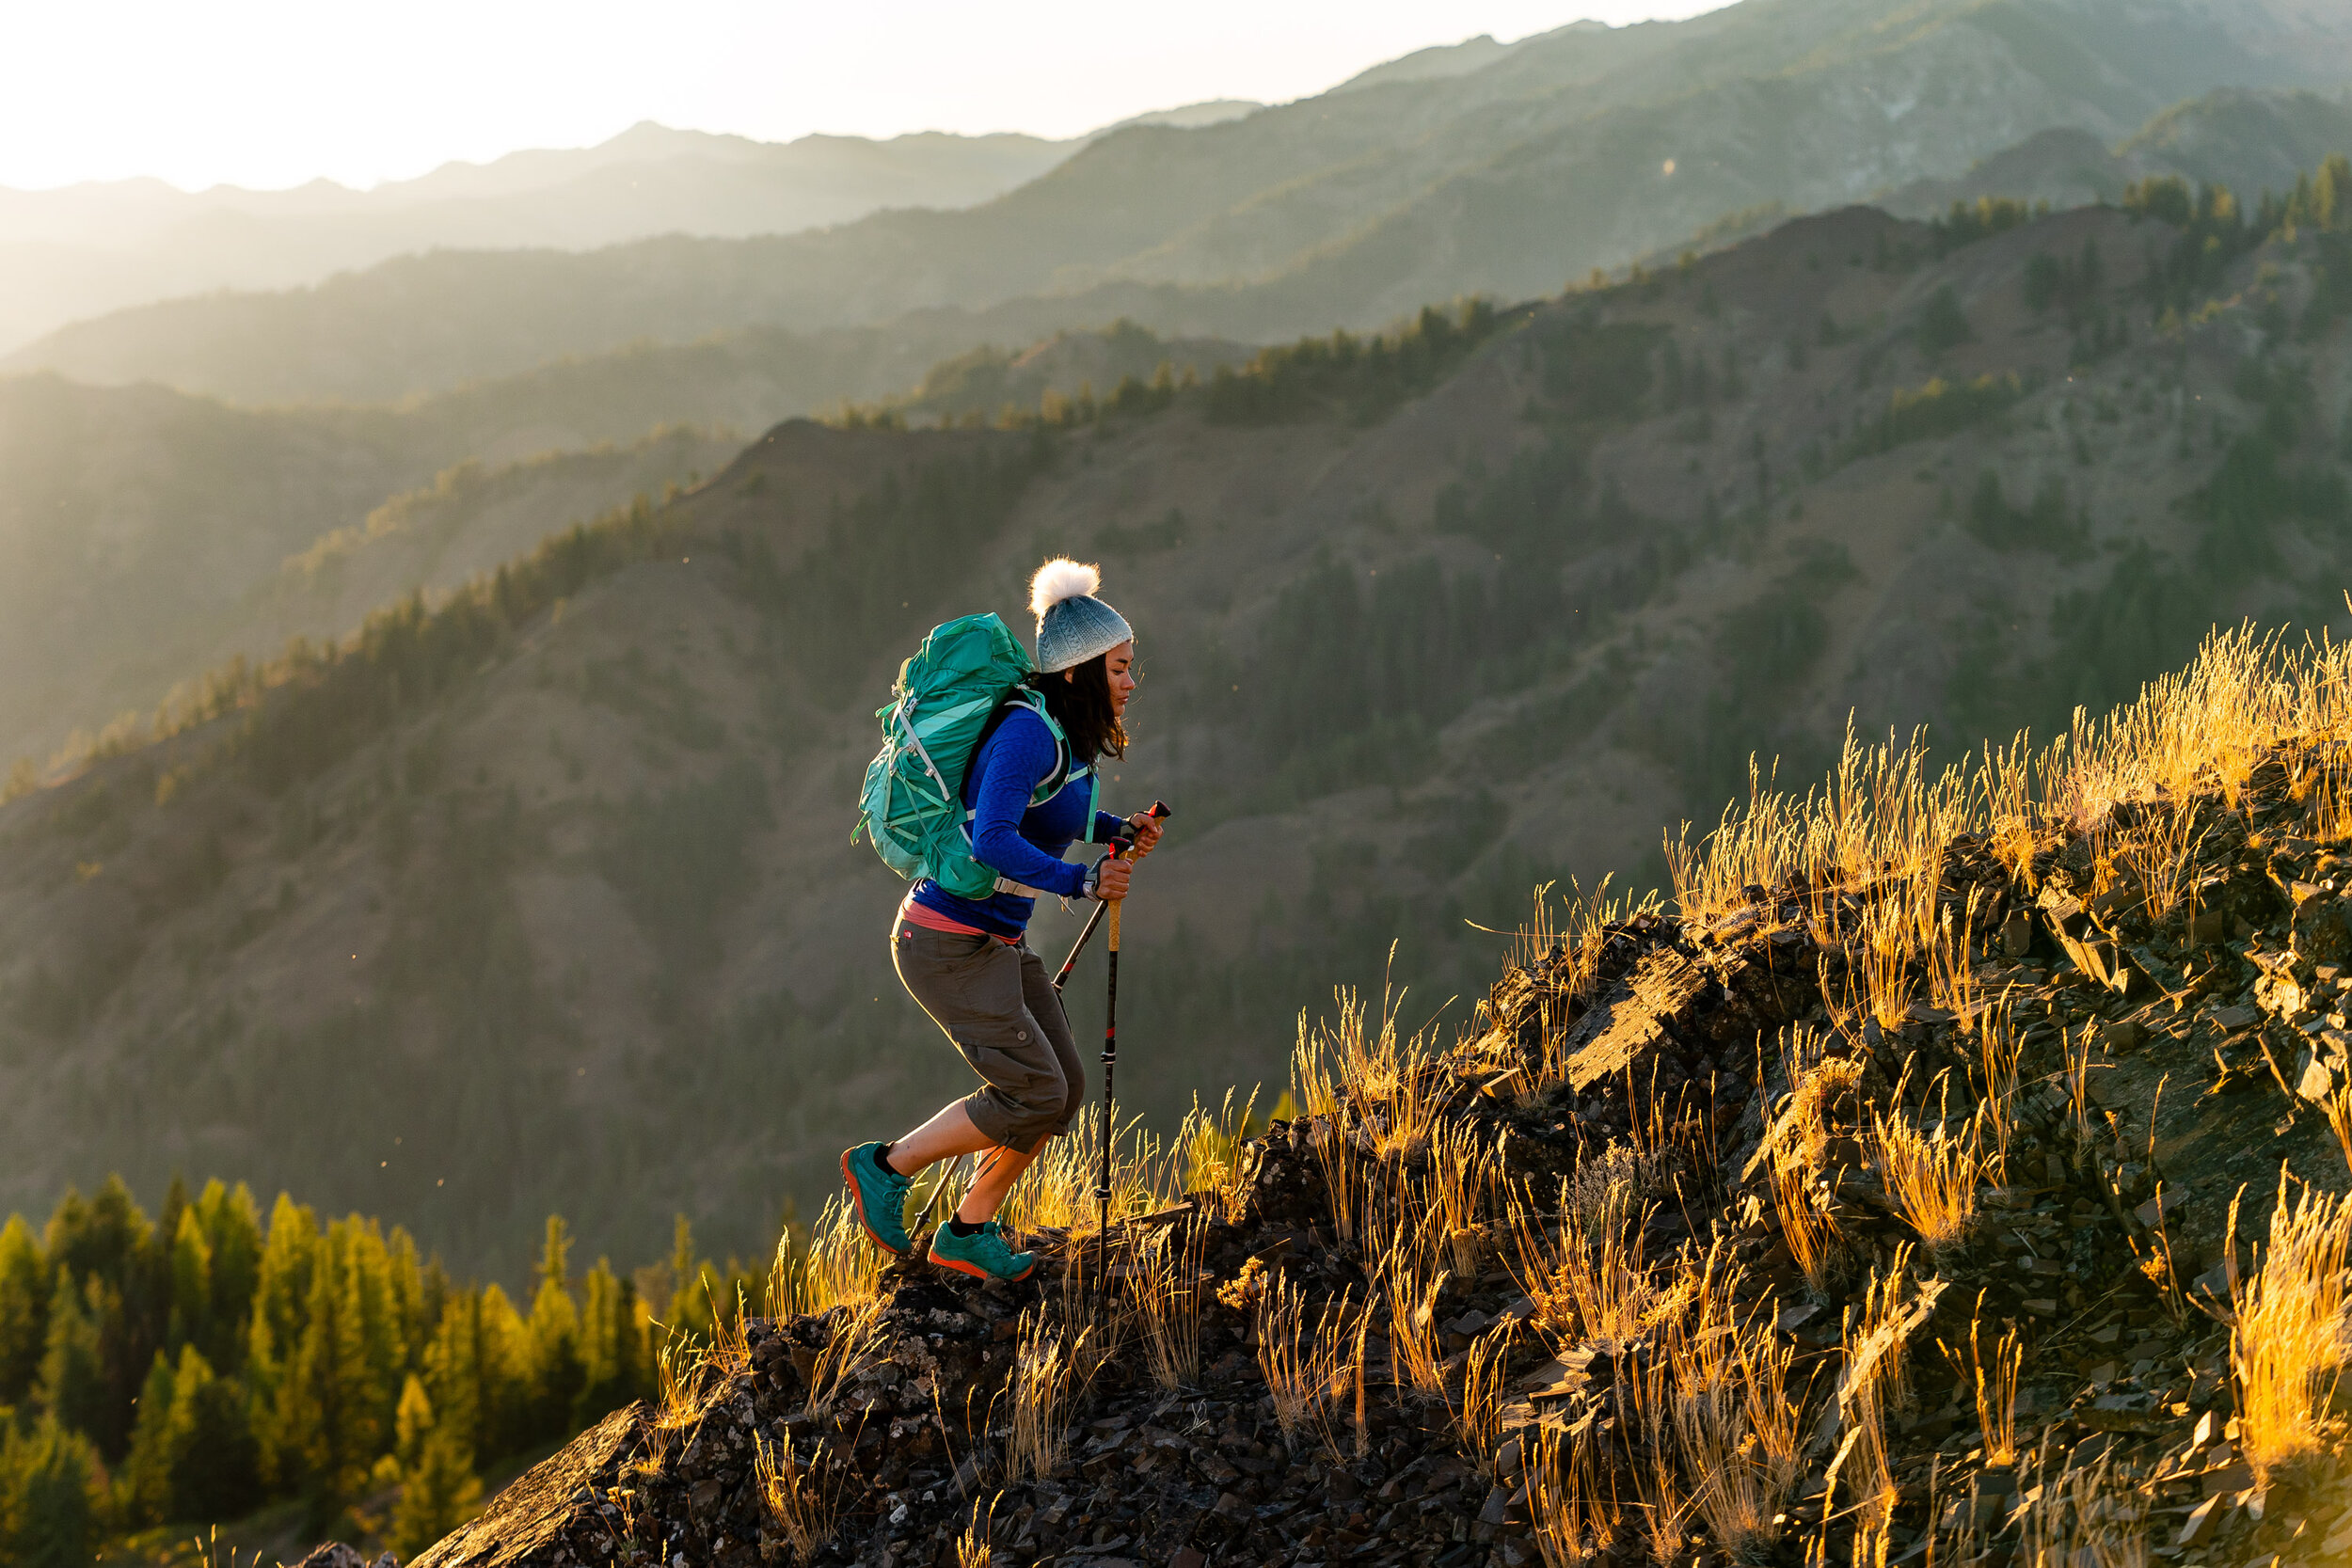  Lifestyle: Tim Cummings and Ariel Gliboff trail running on the Iron Bear trail in early Autumn, Central Cascades, Washington 